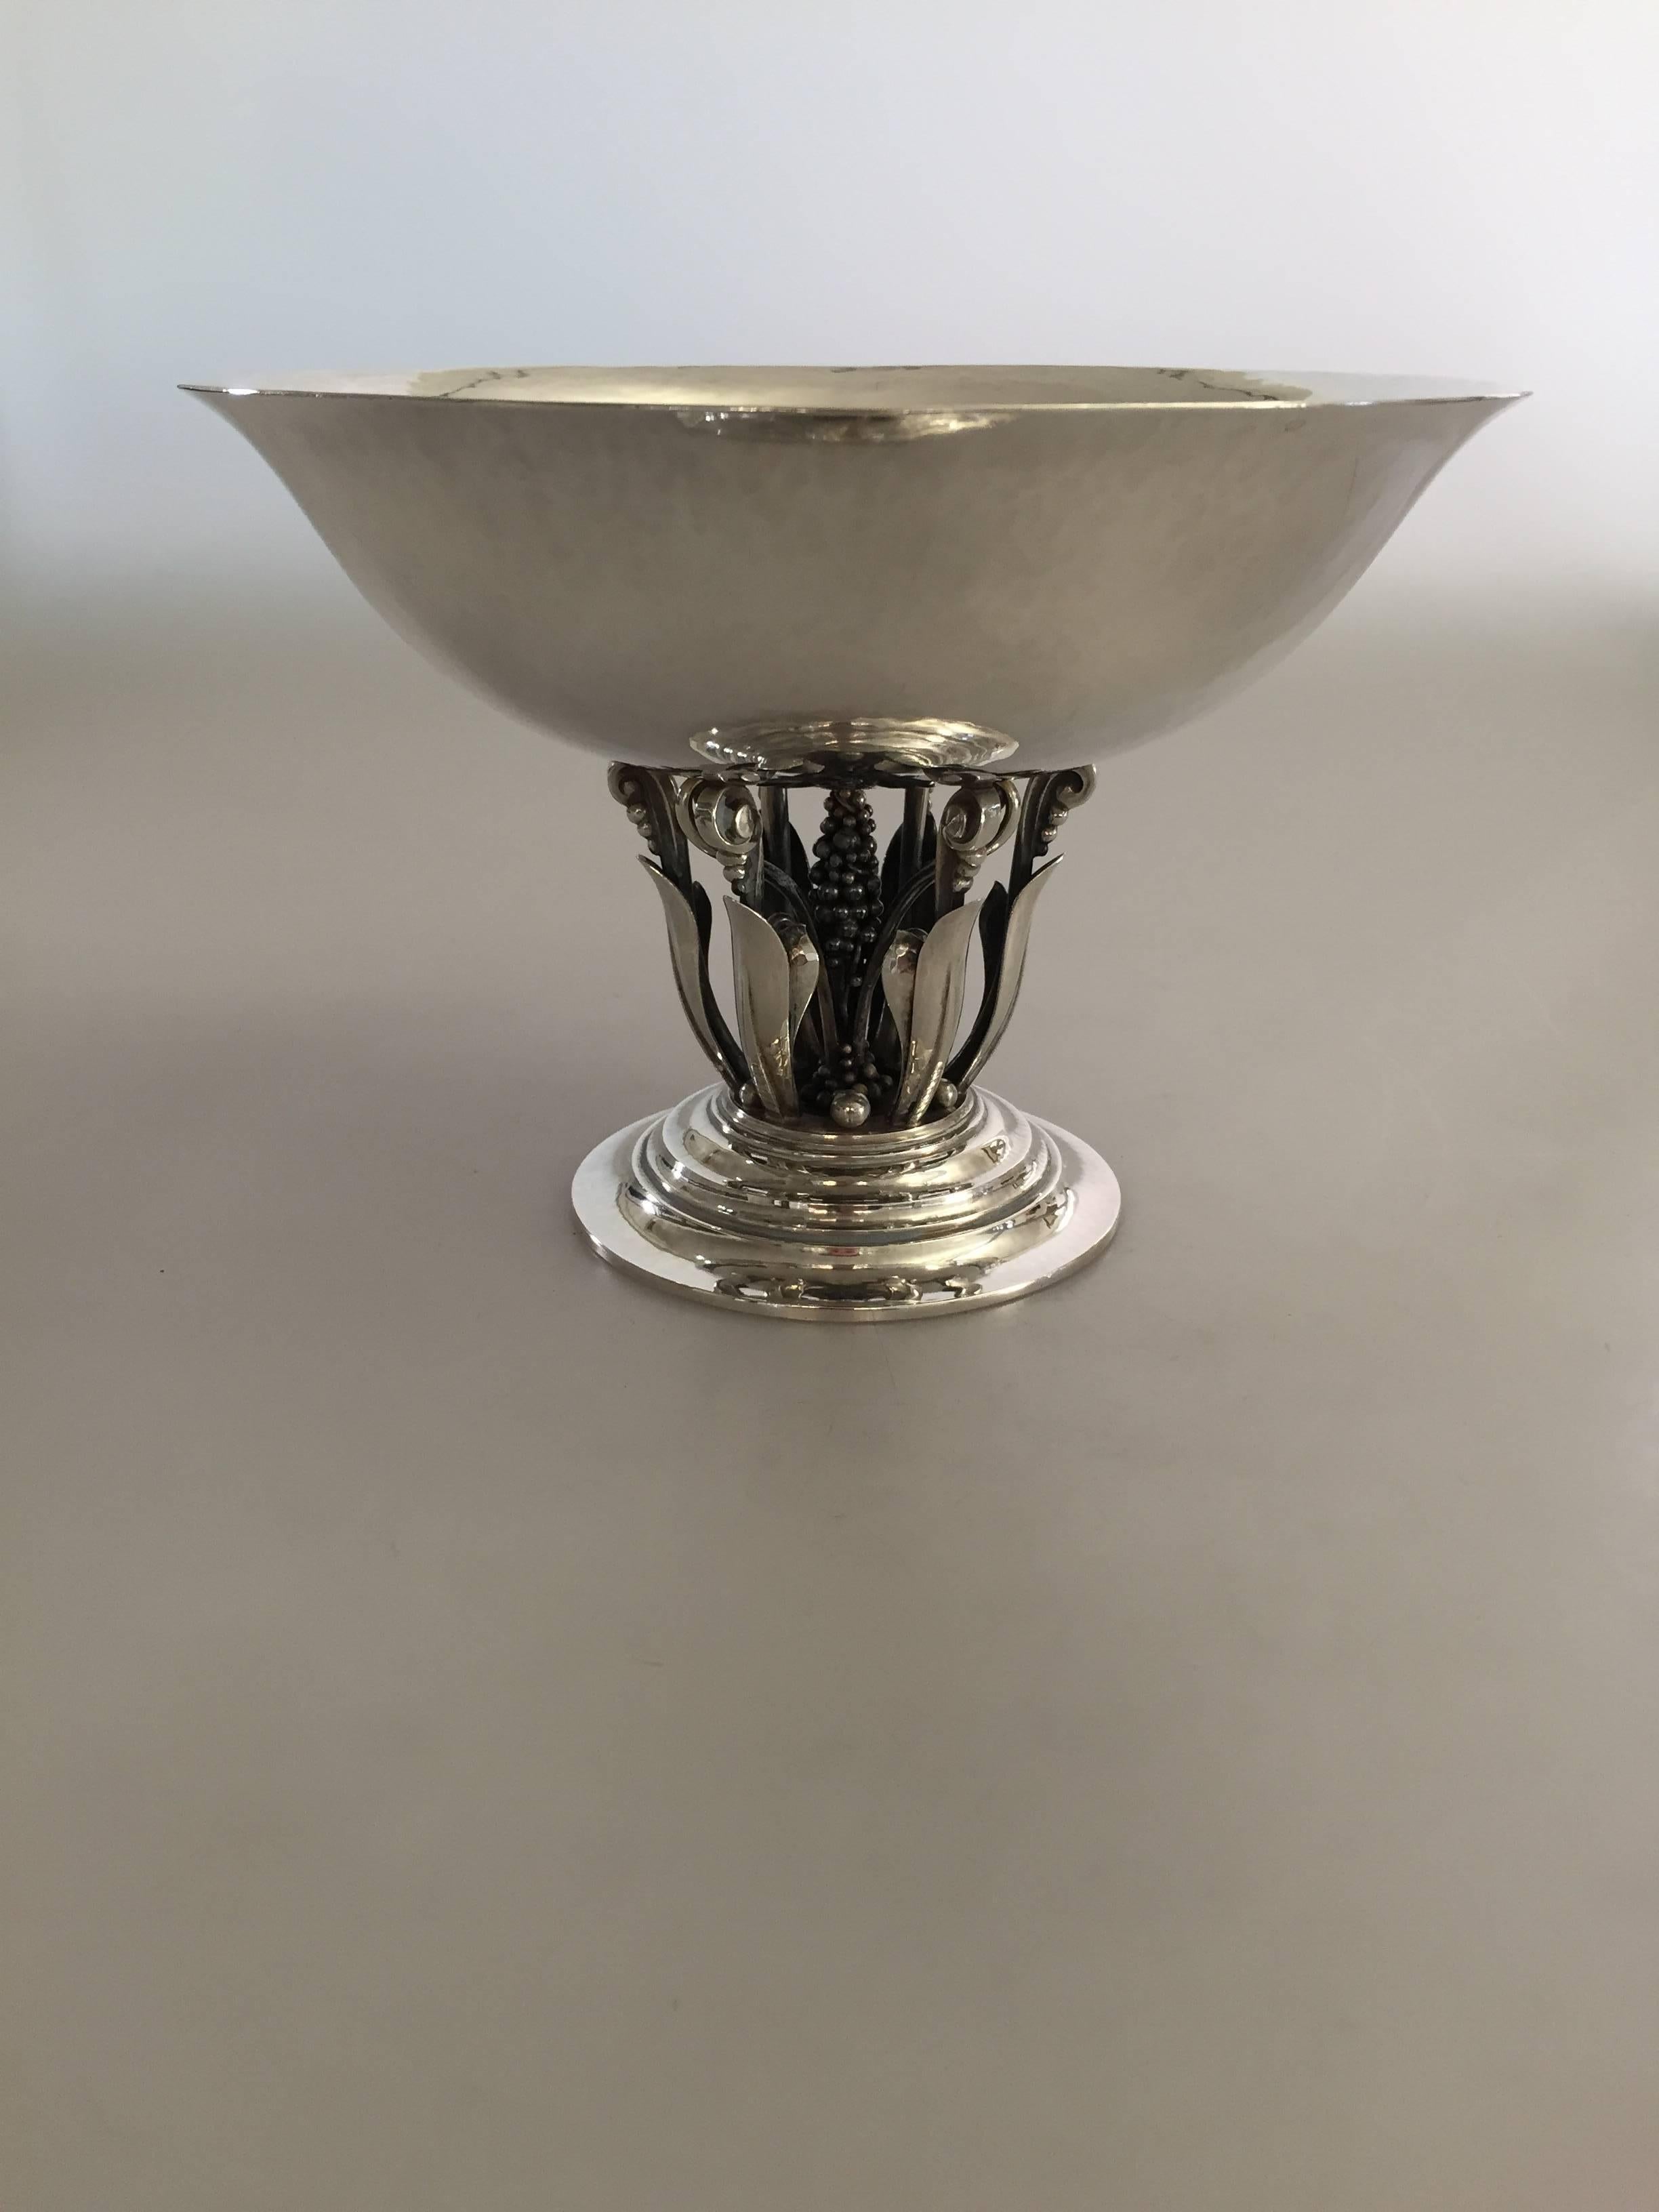 Georg Jensen sterling silver footed bowl #171. From 1920.

 Measures 20 cm diameter, 14 cm H.
 Weighs 606 g / 21.40 oz.